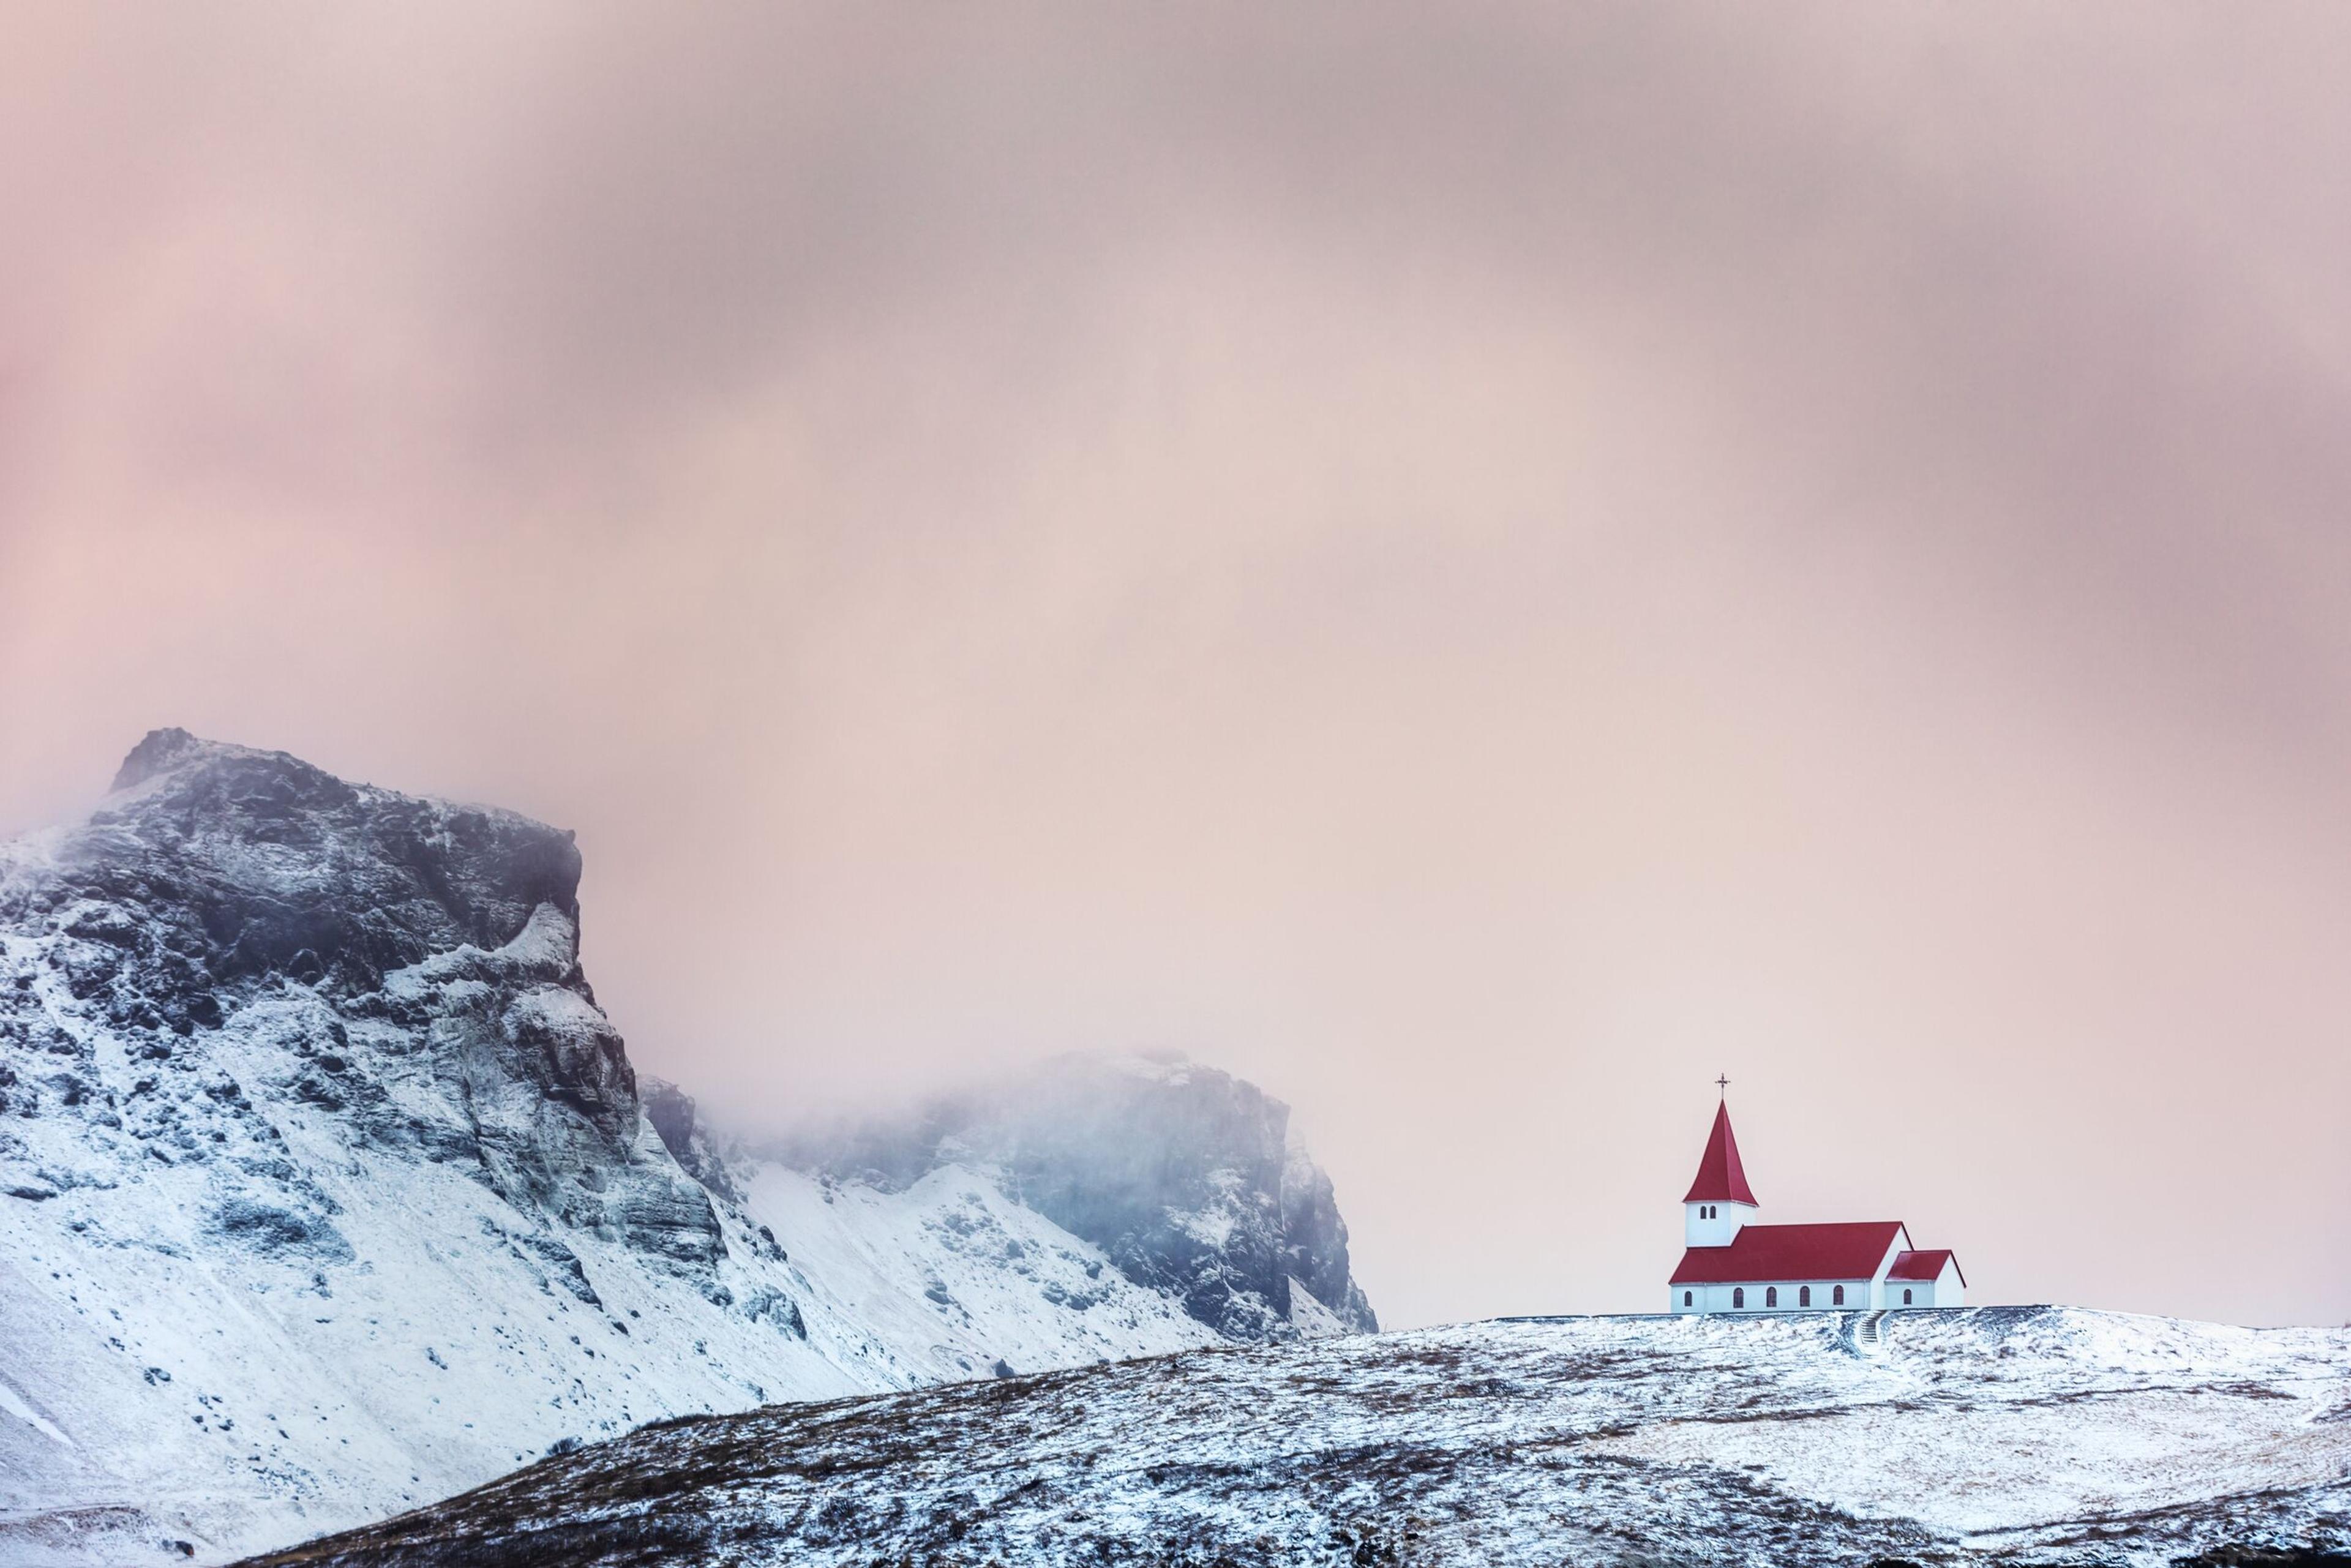 A small church with a bright red roof stands out against a snowy landscape, with rugged cliffs partially shrouded by mist in the background. The sky is a soft pink hue, adding a serene atmosphere to the scene.